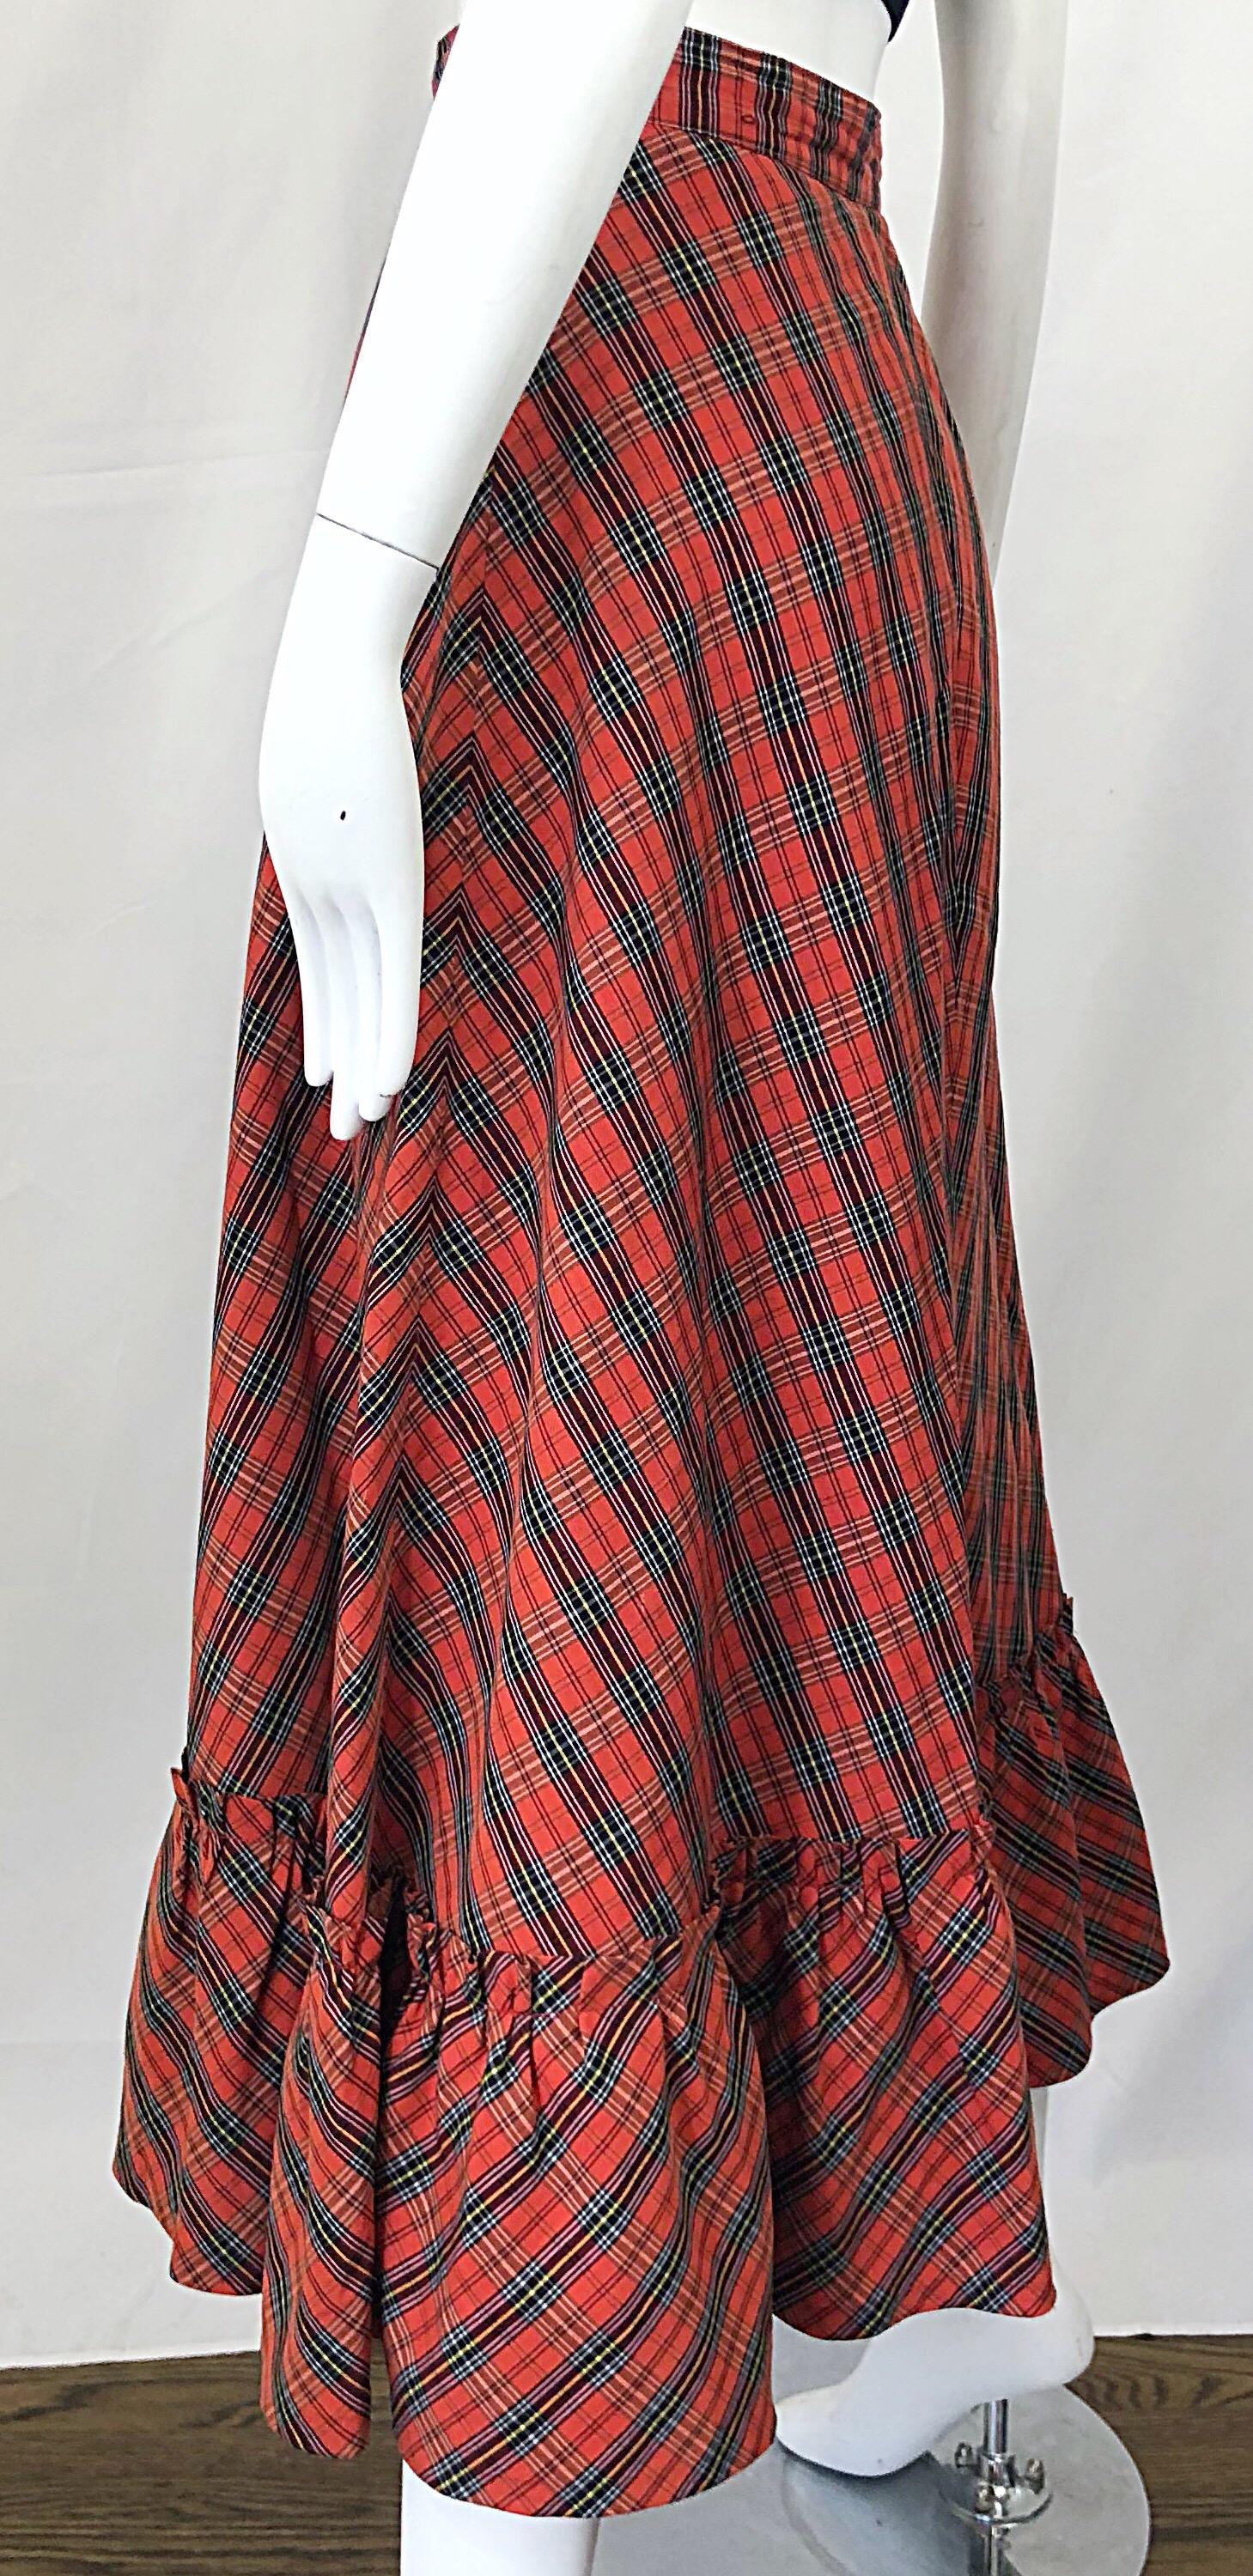 1970s Red Plaid Cotton Voile Ruffled Hem Vintage 70s Maxi Skirt For ...